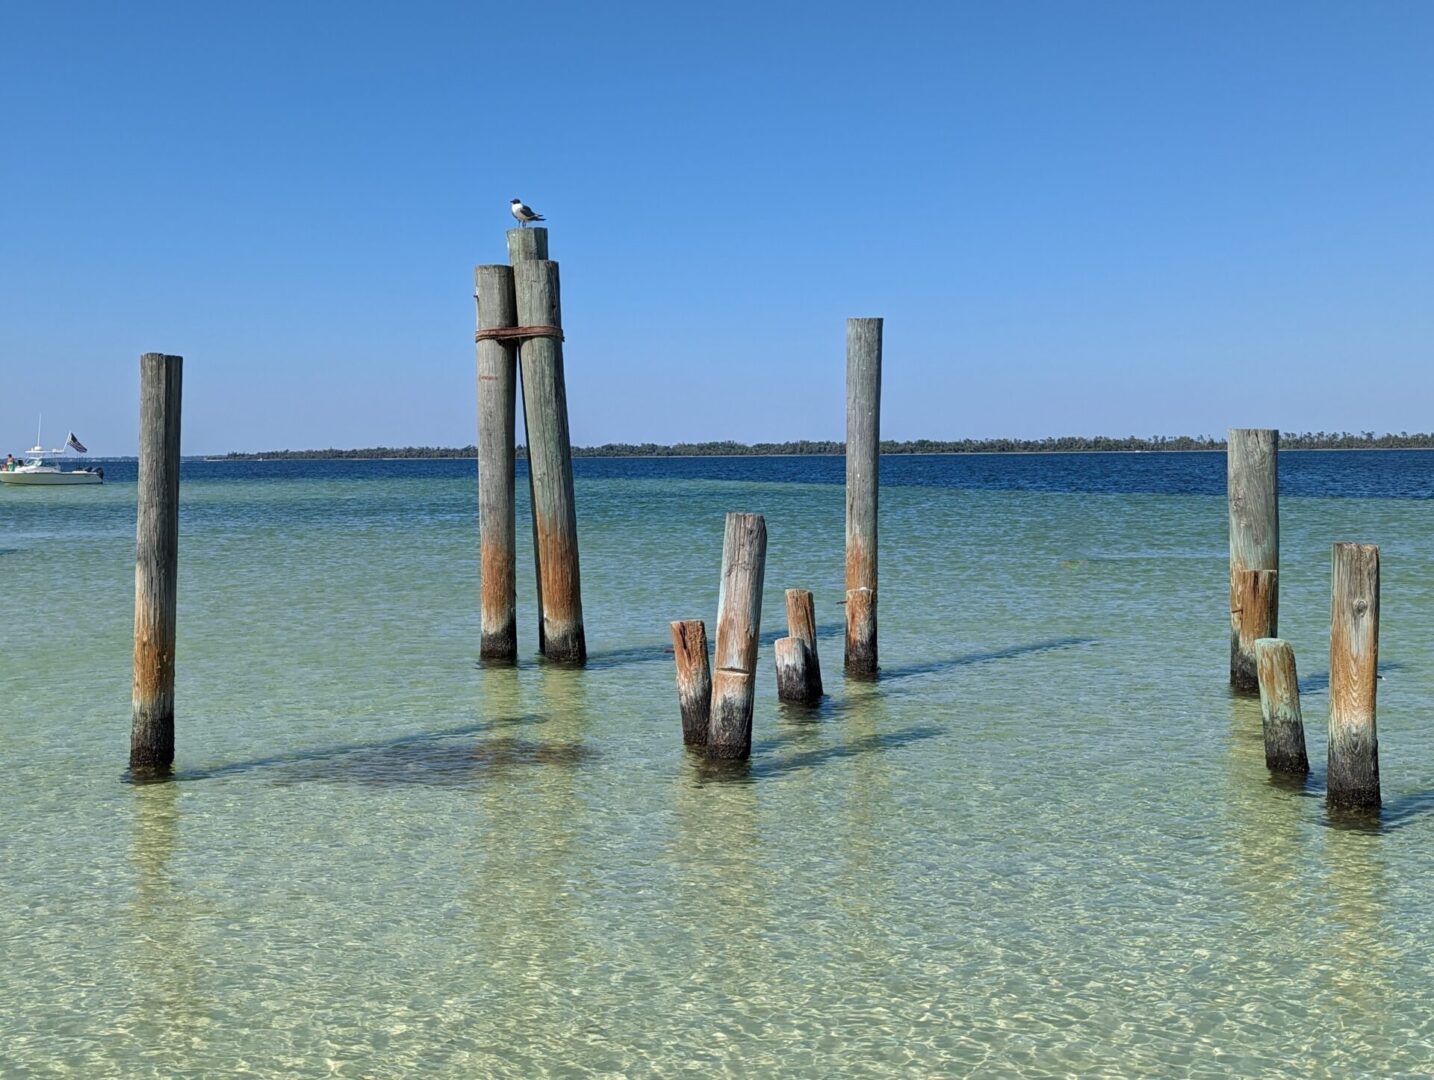 A group of wooden posts in the water.